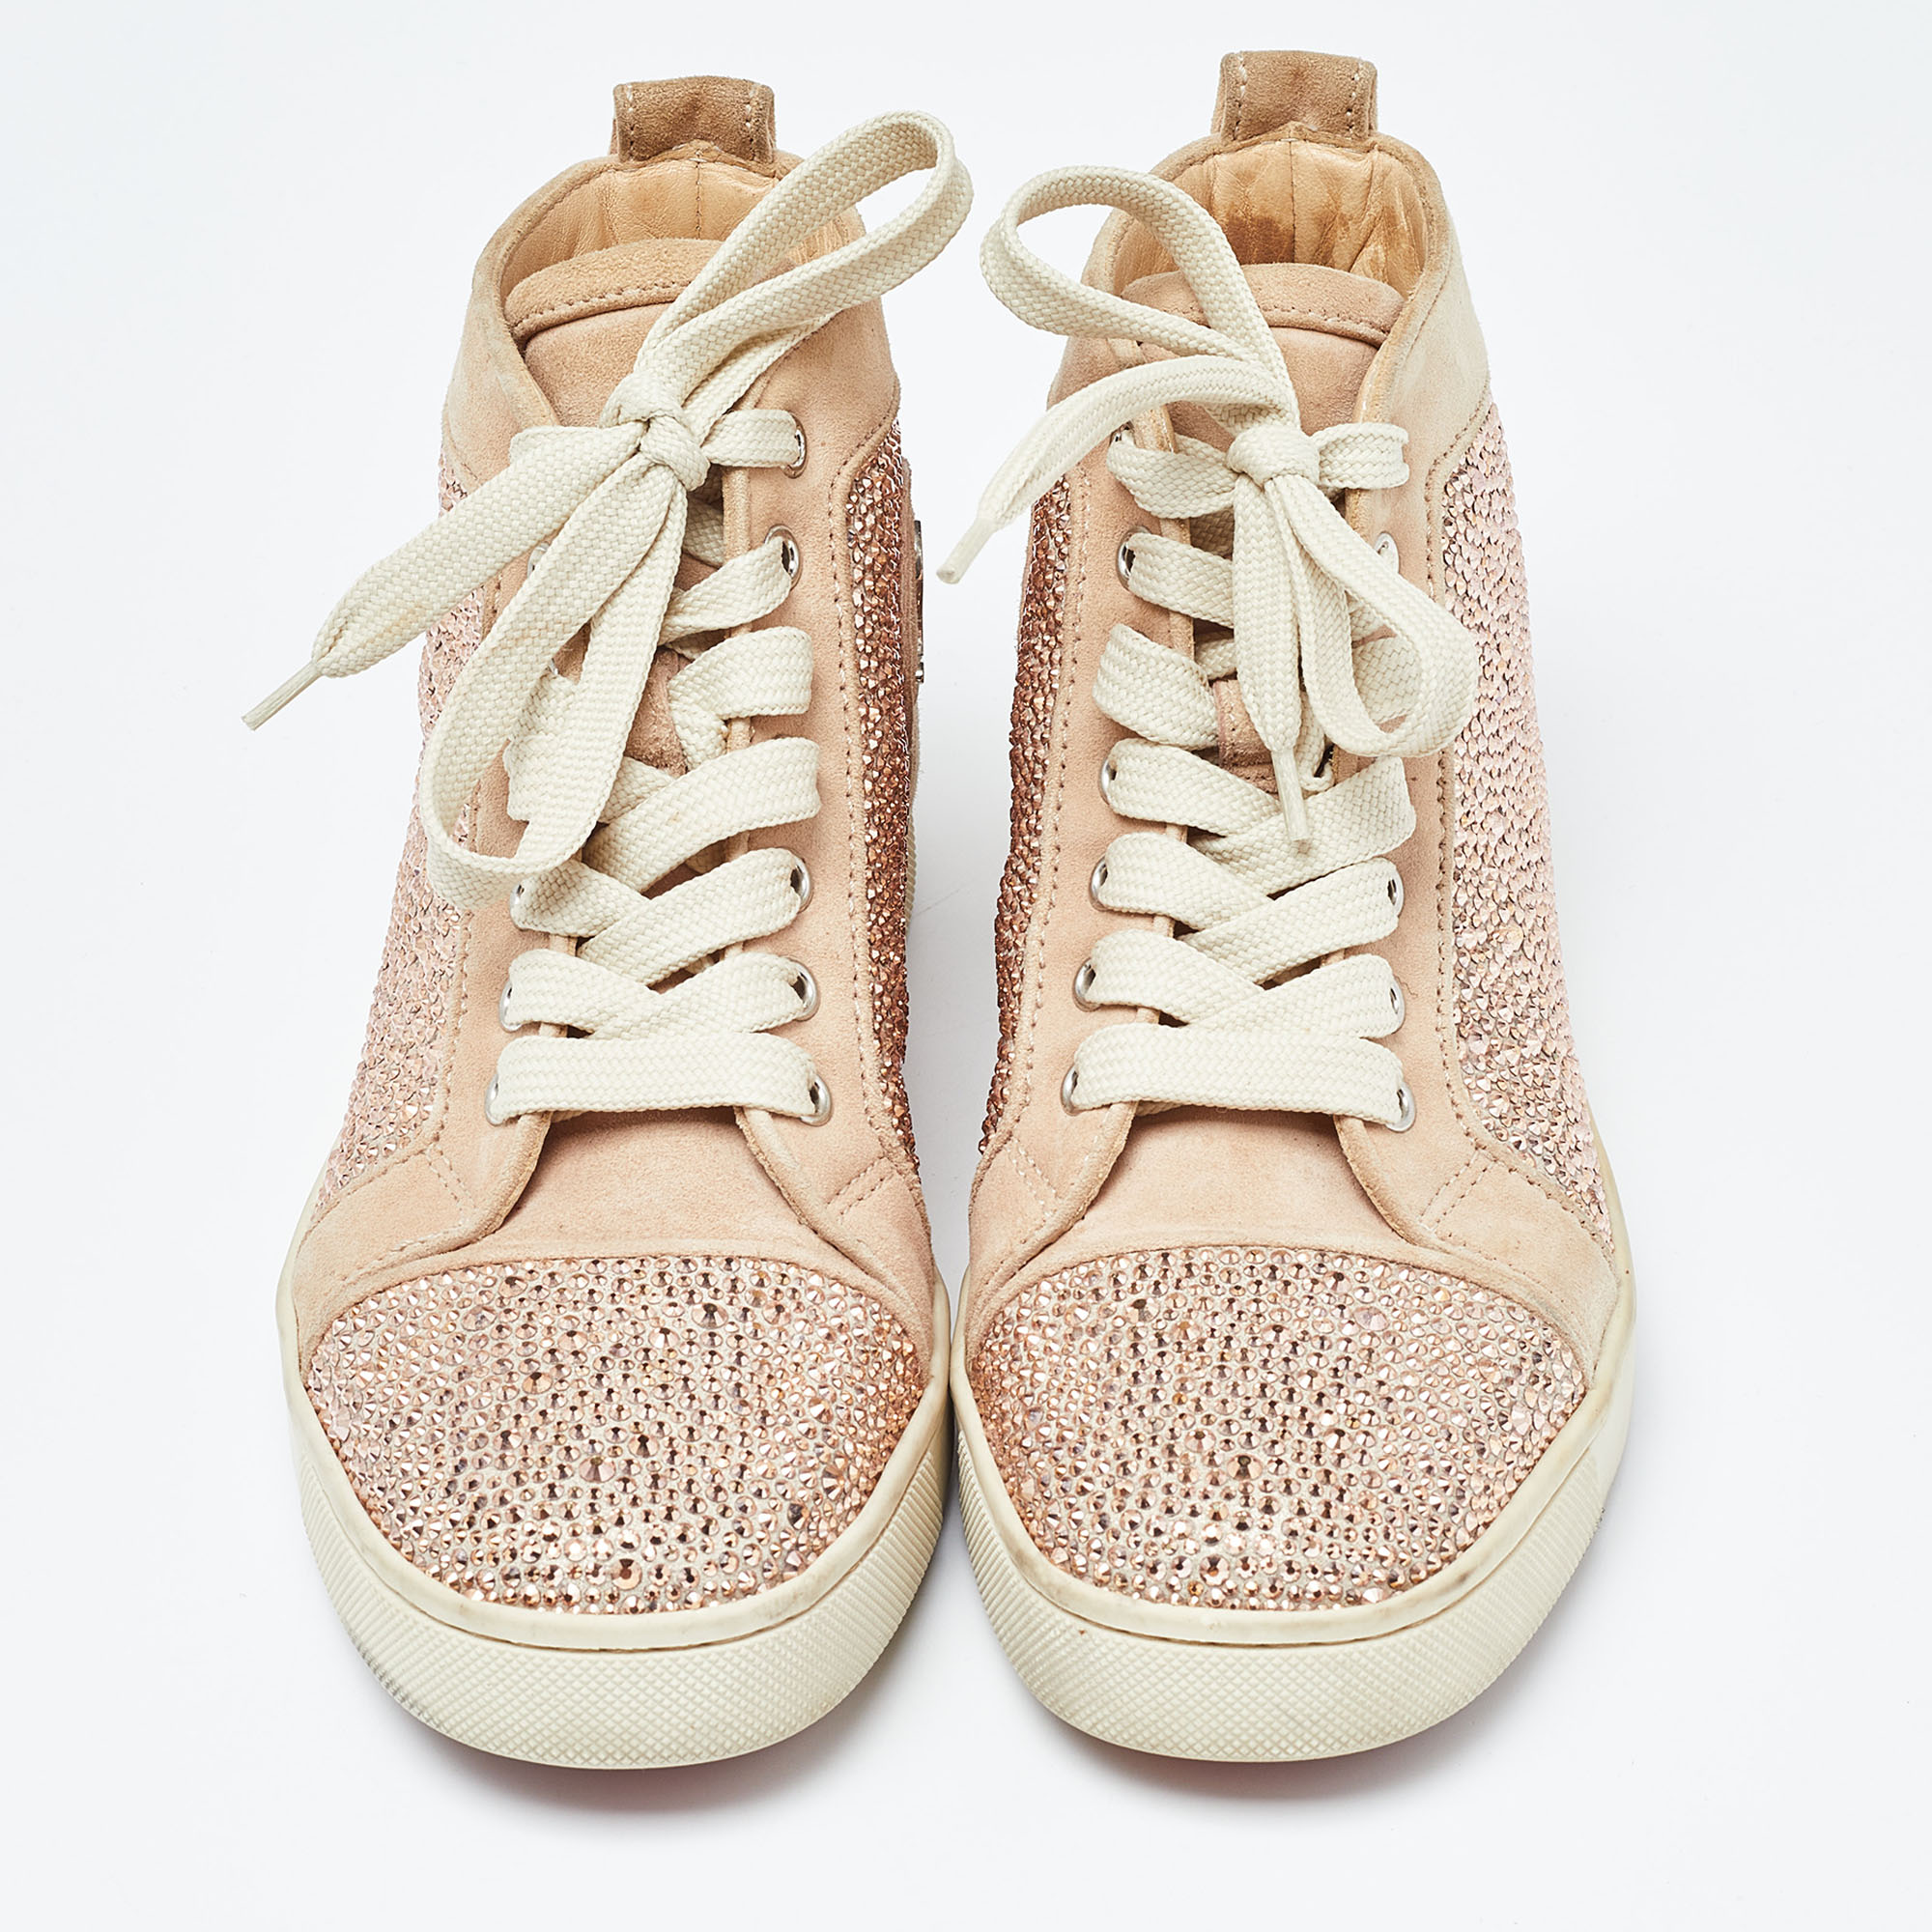 Christian Louboutin Beige Suede Embellished High Top Sneakers Size 37.5